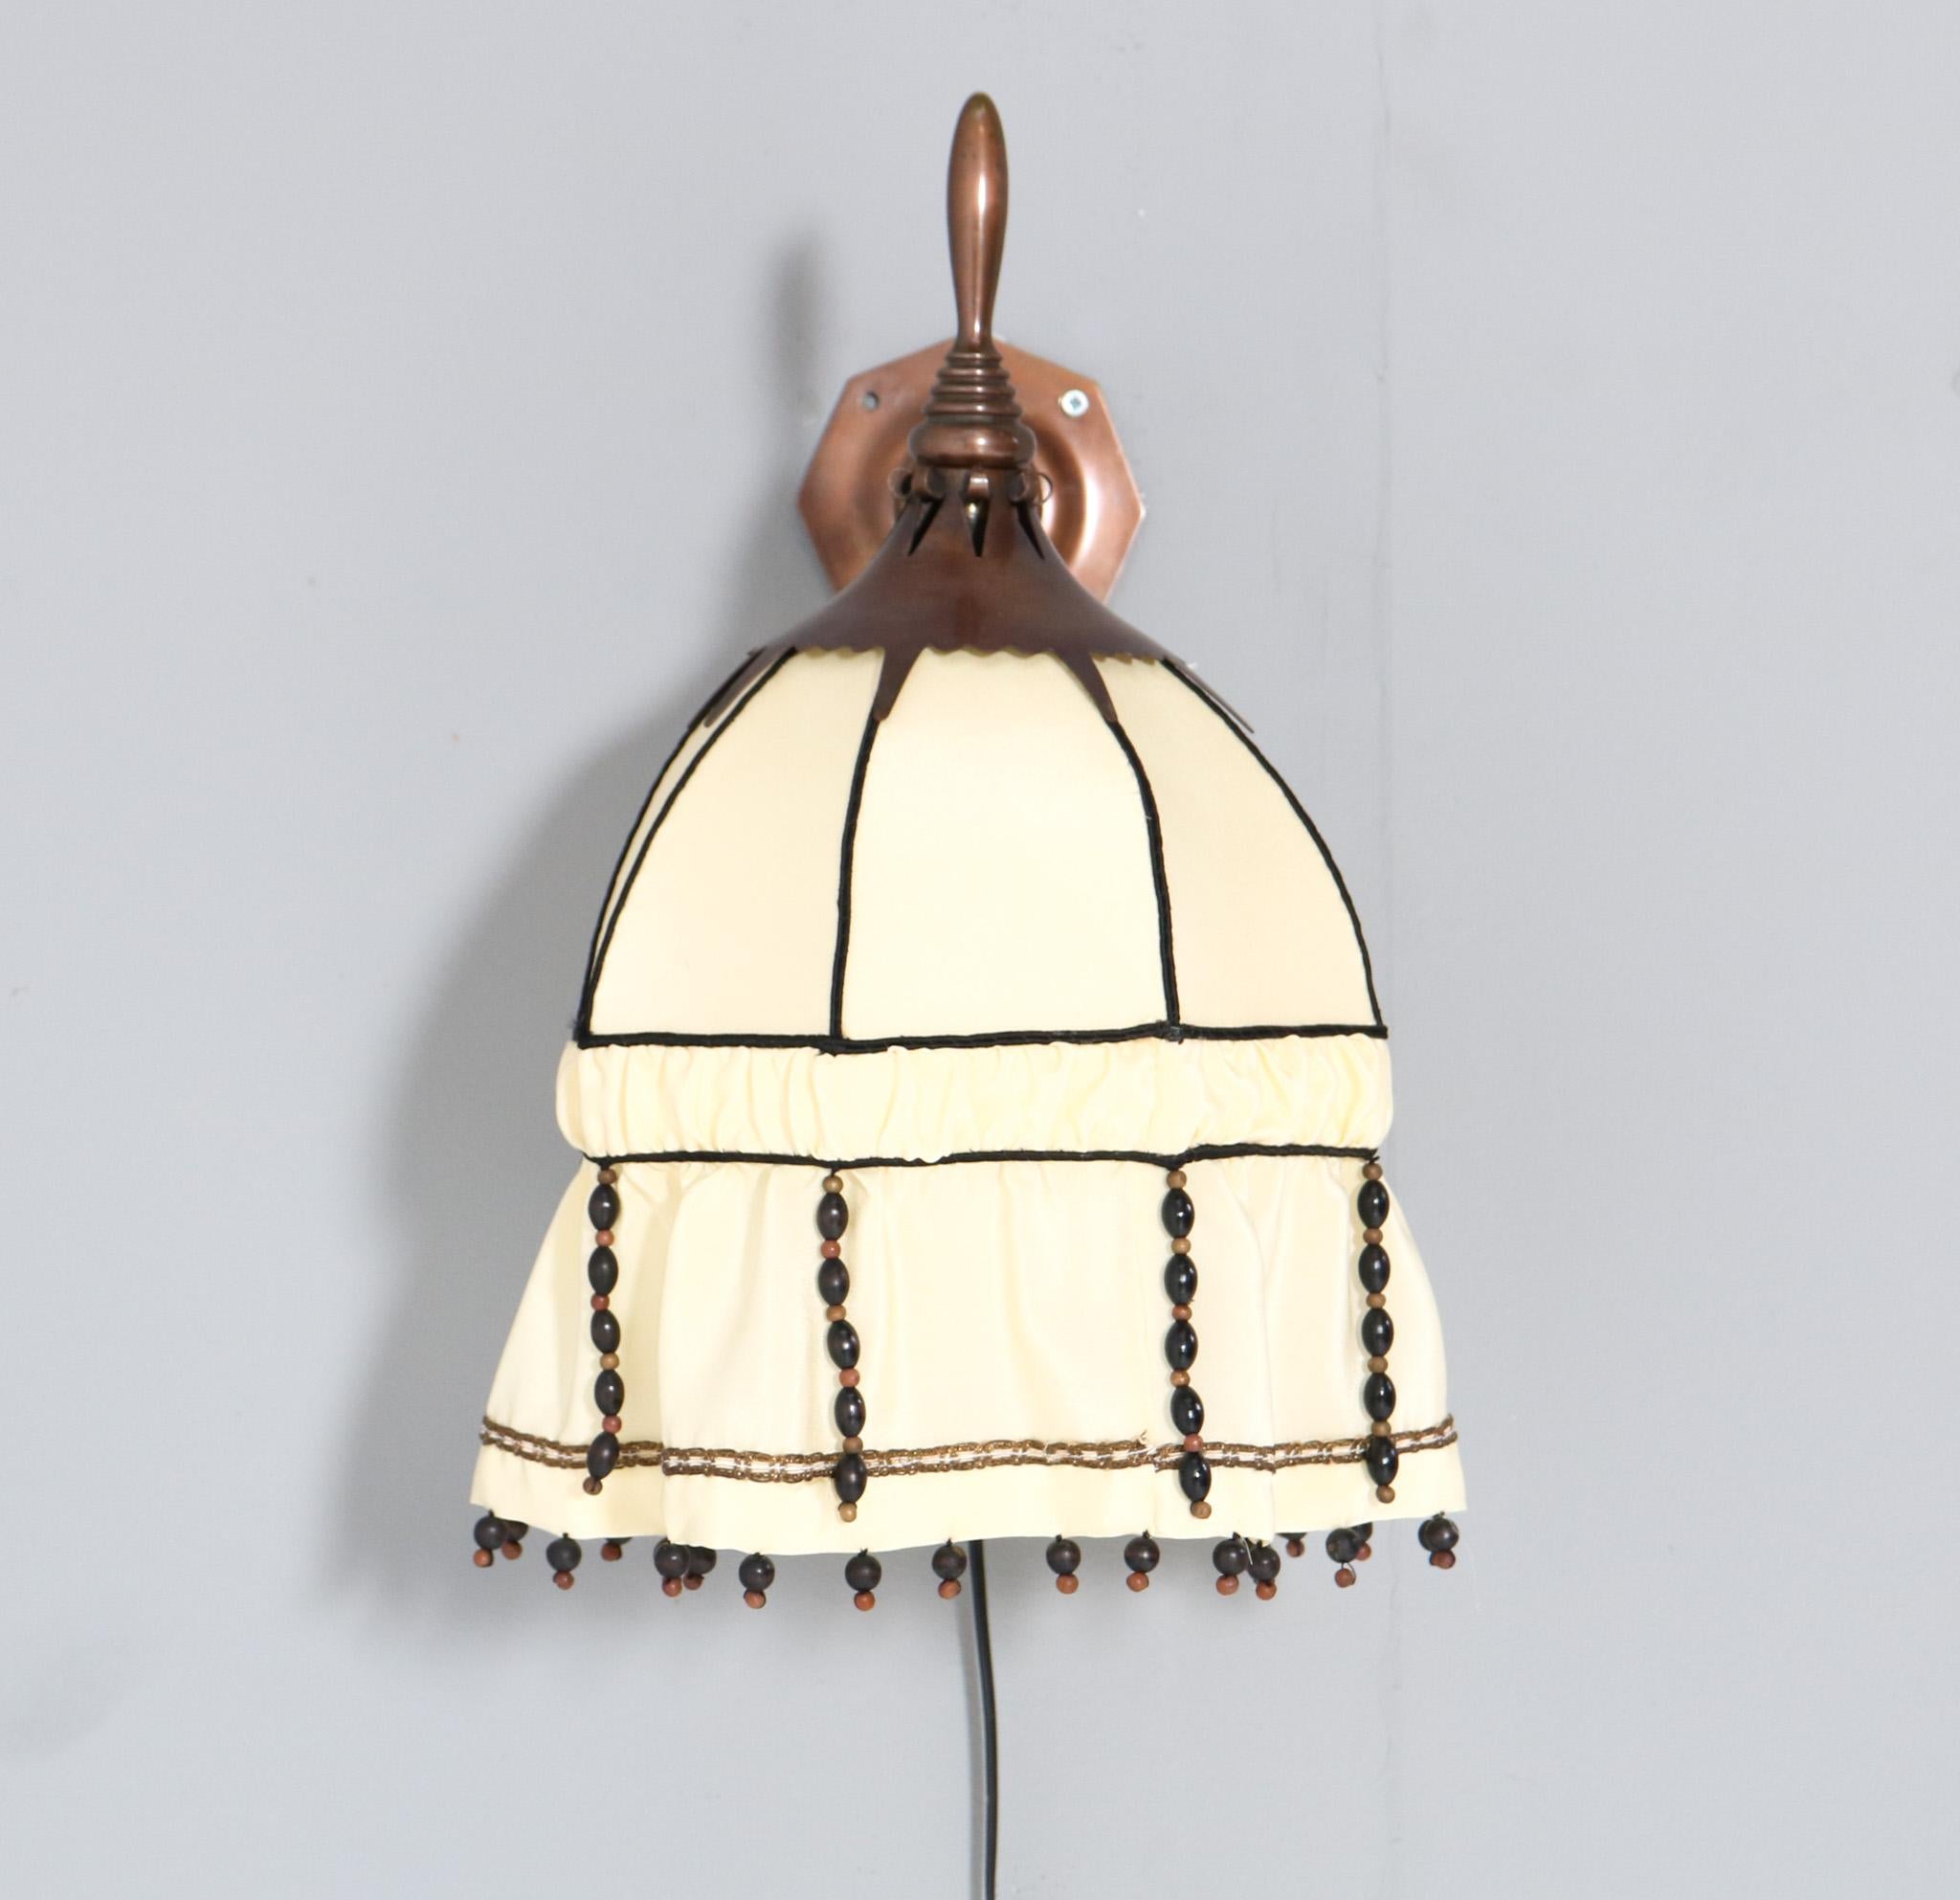 Magnificent and rare Art Deco Amsterdamse School wall light.
Striking Dutch design from the 1920s
Patinated copper frame with renewed shantung silk shade.
In very good original condition with minor wear consistent with age and use, preserving a